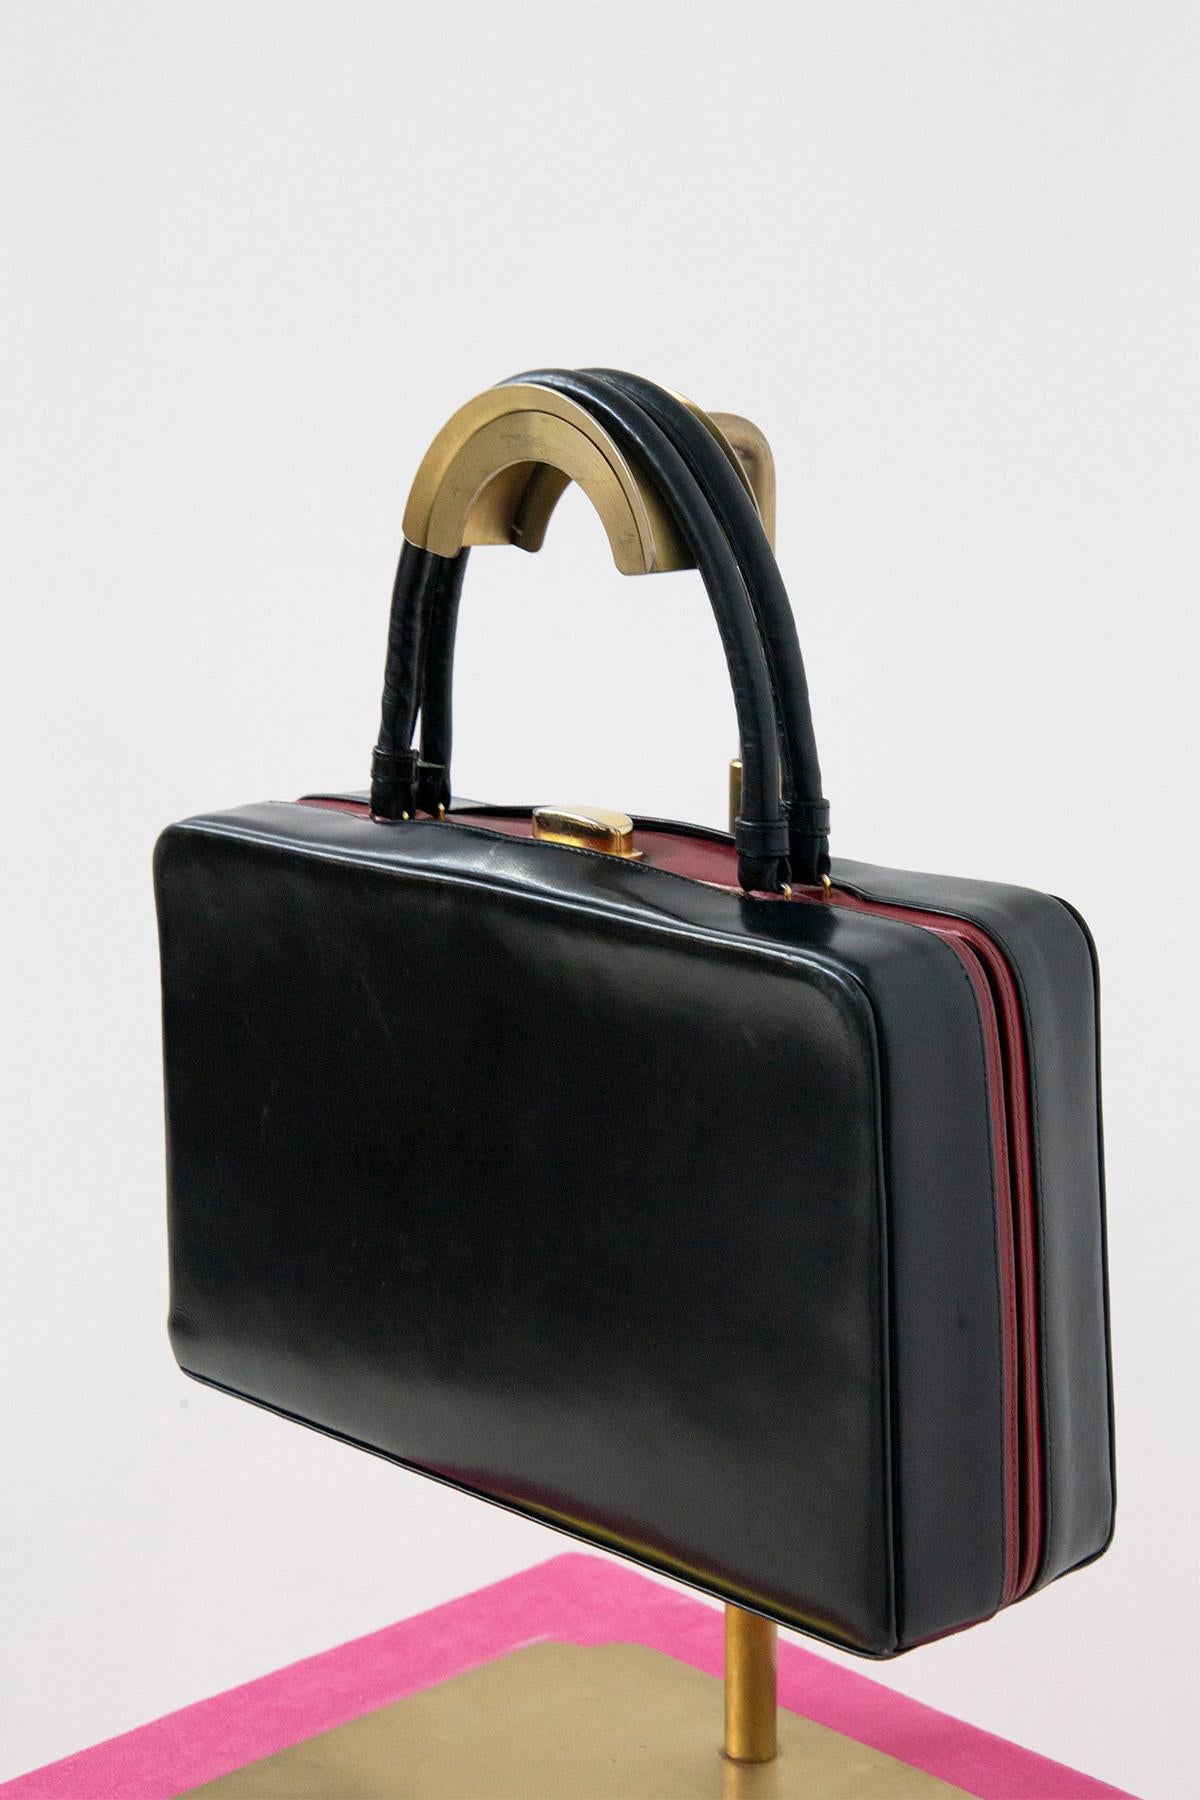 Gucci vintage red and black leather handbag In Good Condition For Sale In Milano, IT